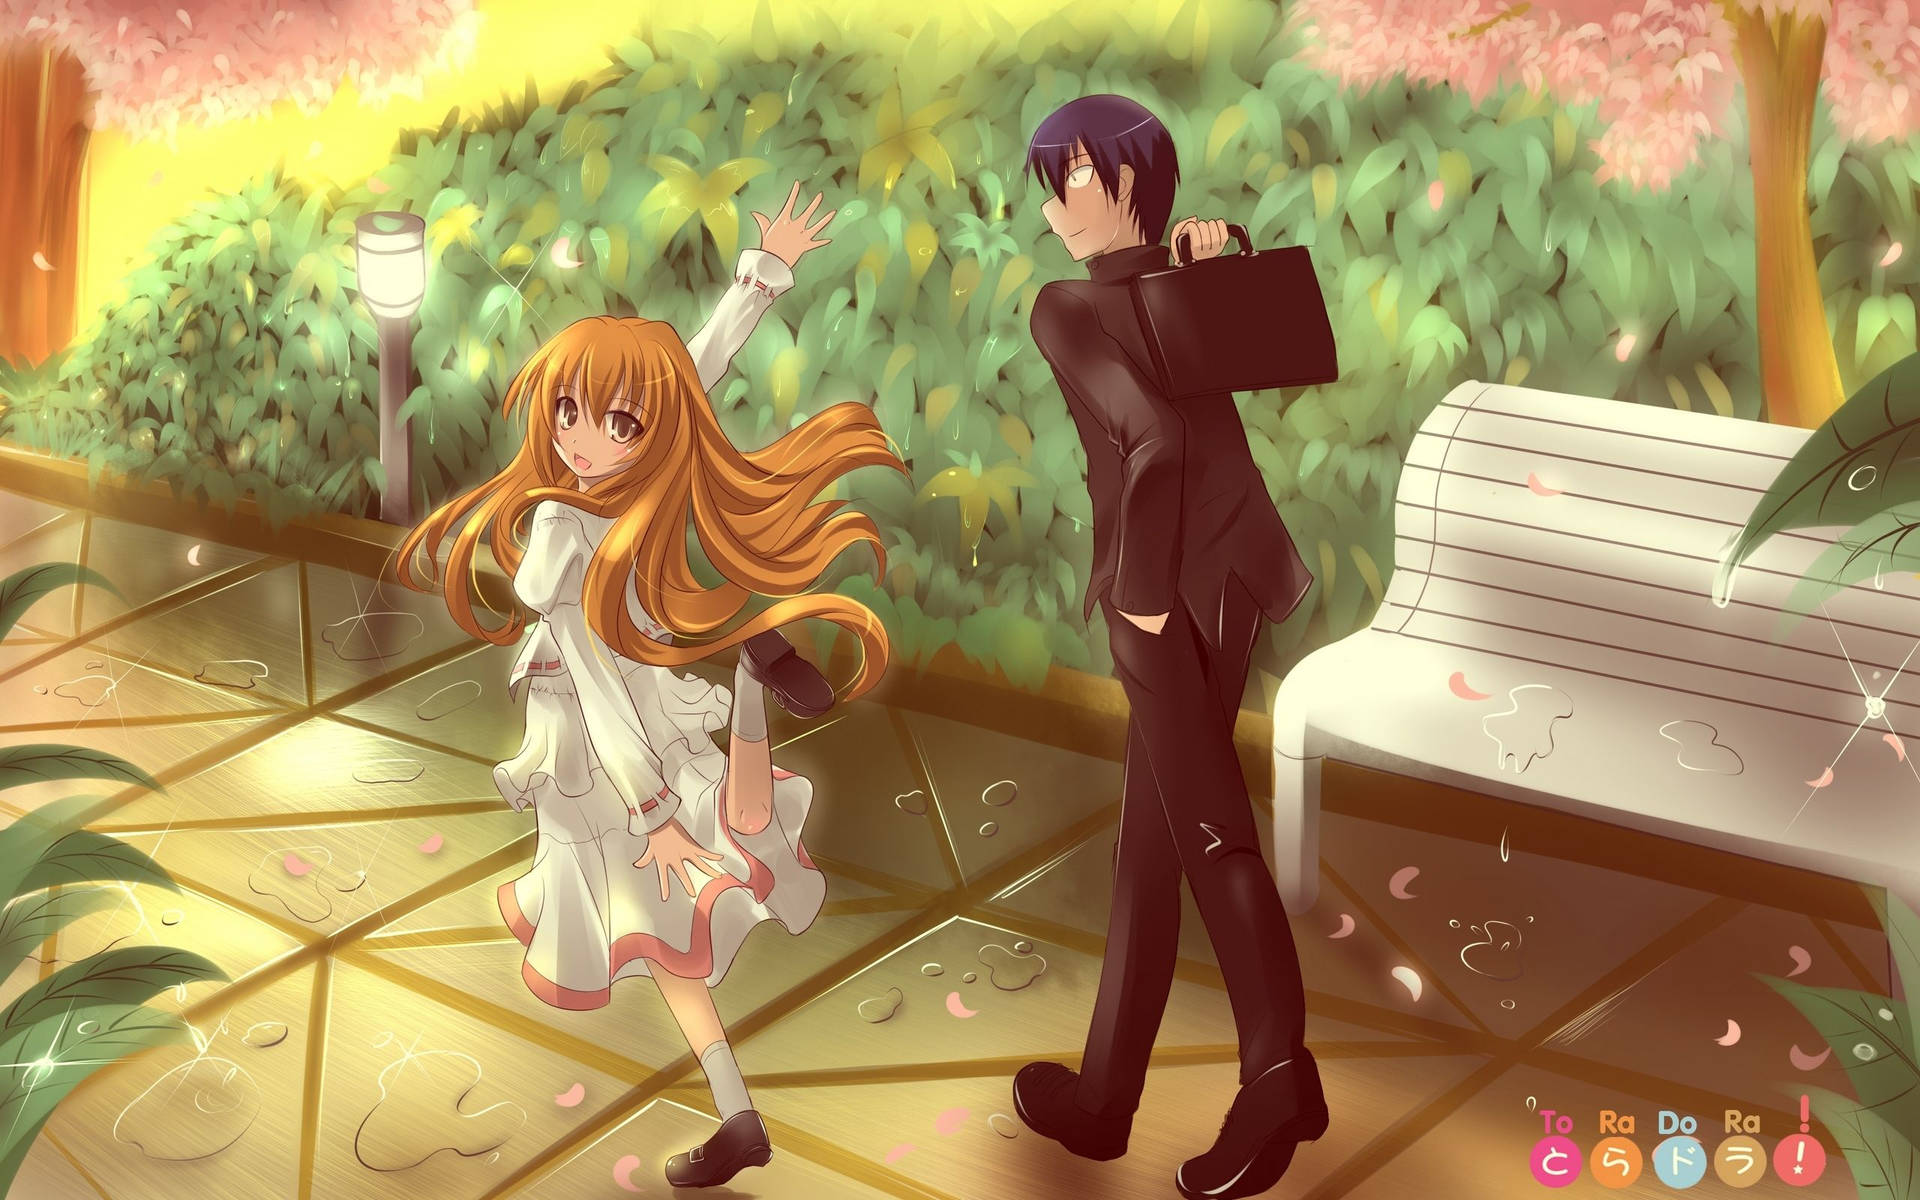 A romantic rainy evening in the city lights with Taiga from 'Toradora!' Wallpaper